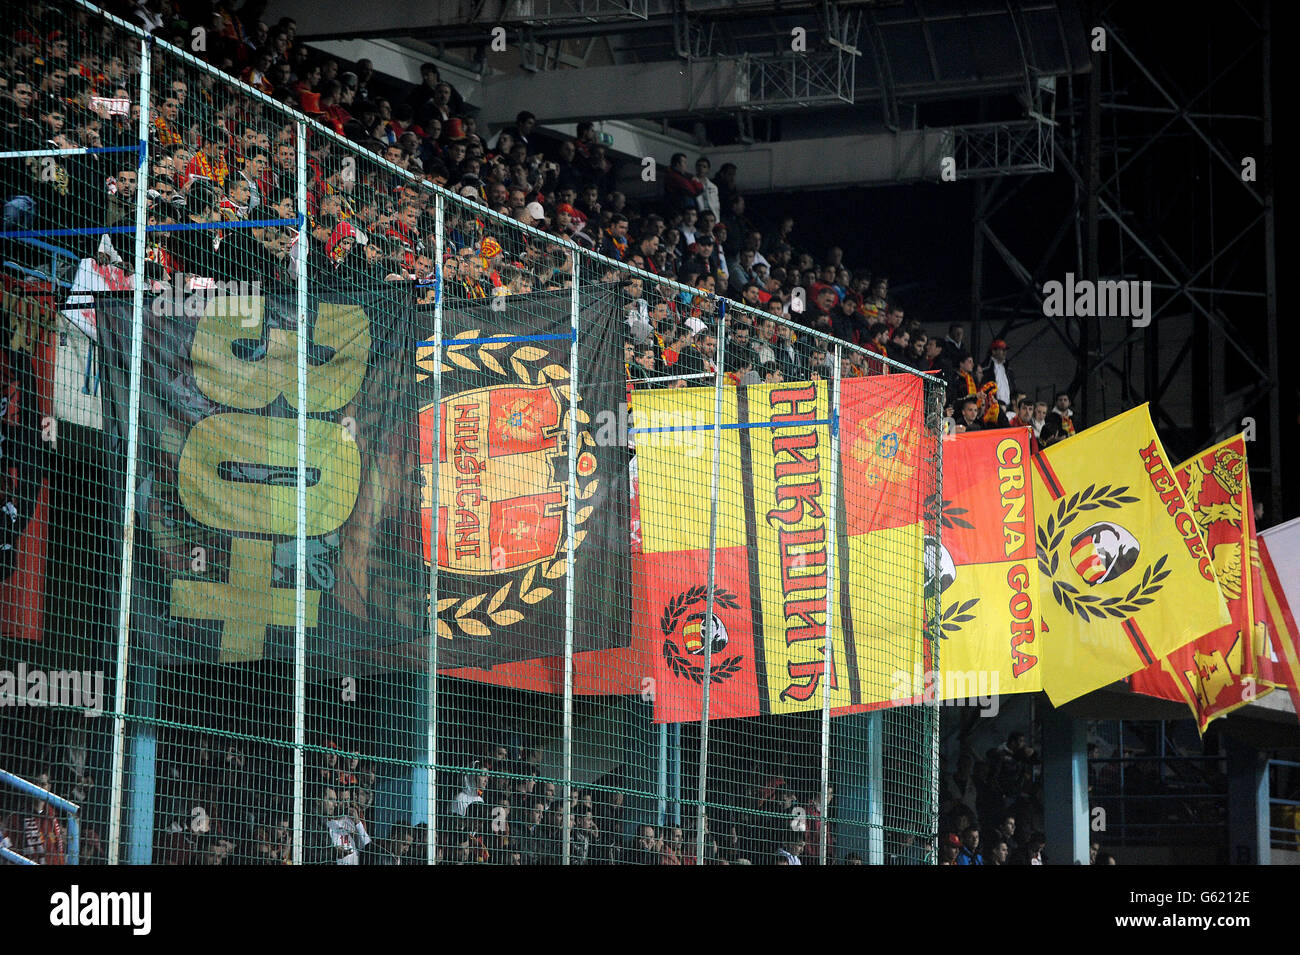 Soccer - 2014 World Cup Qualifier - Group H - Montenegro v England - City Stadium. Montenegro flags hang from the stands in the City Stadium, Podgorica Stock Photo